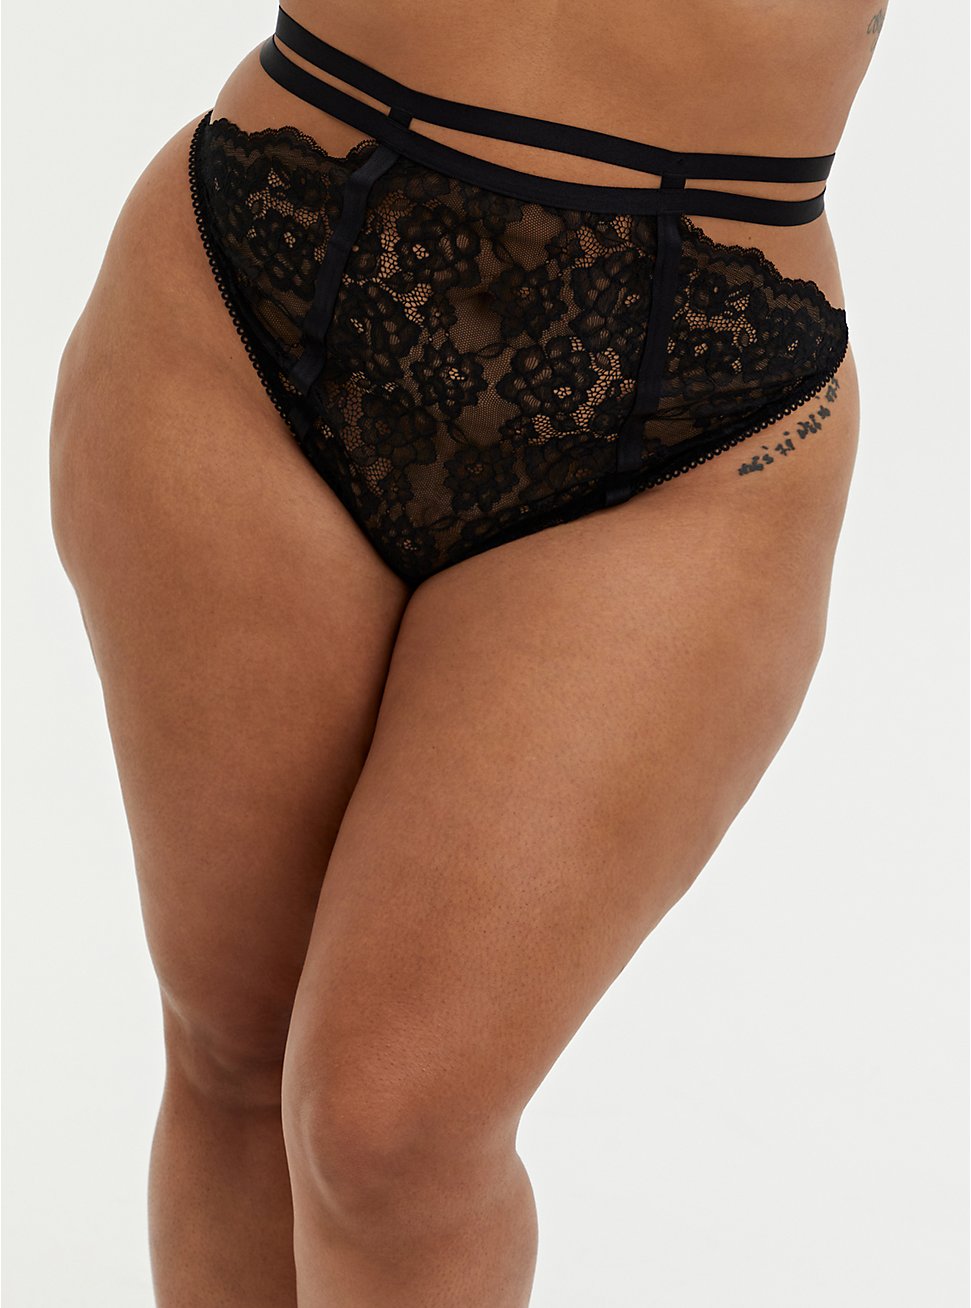 Straps And Rings Lace Thong Panty, RICH BLACK, hi-res